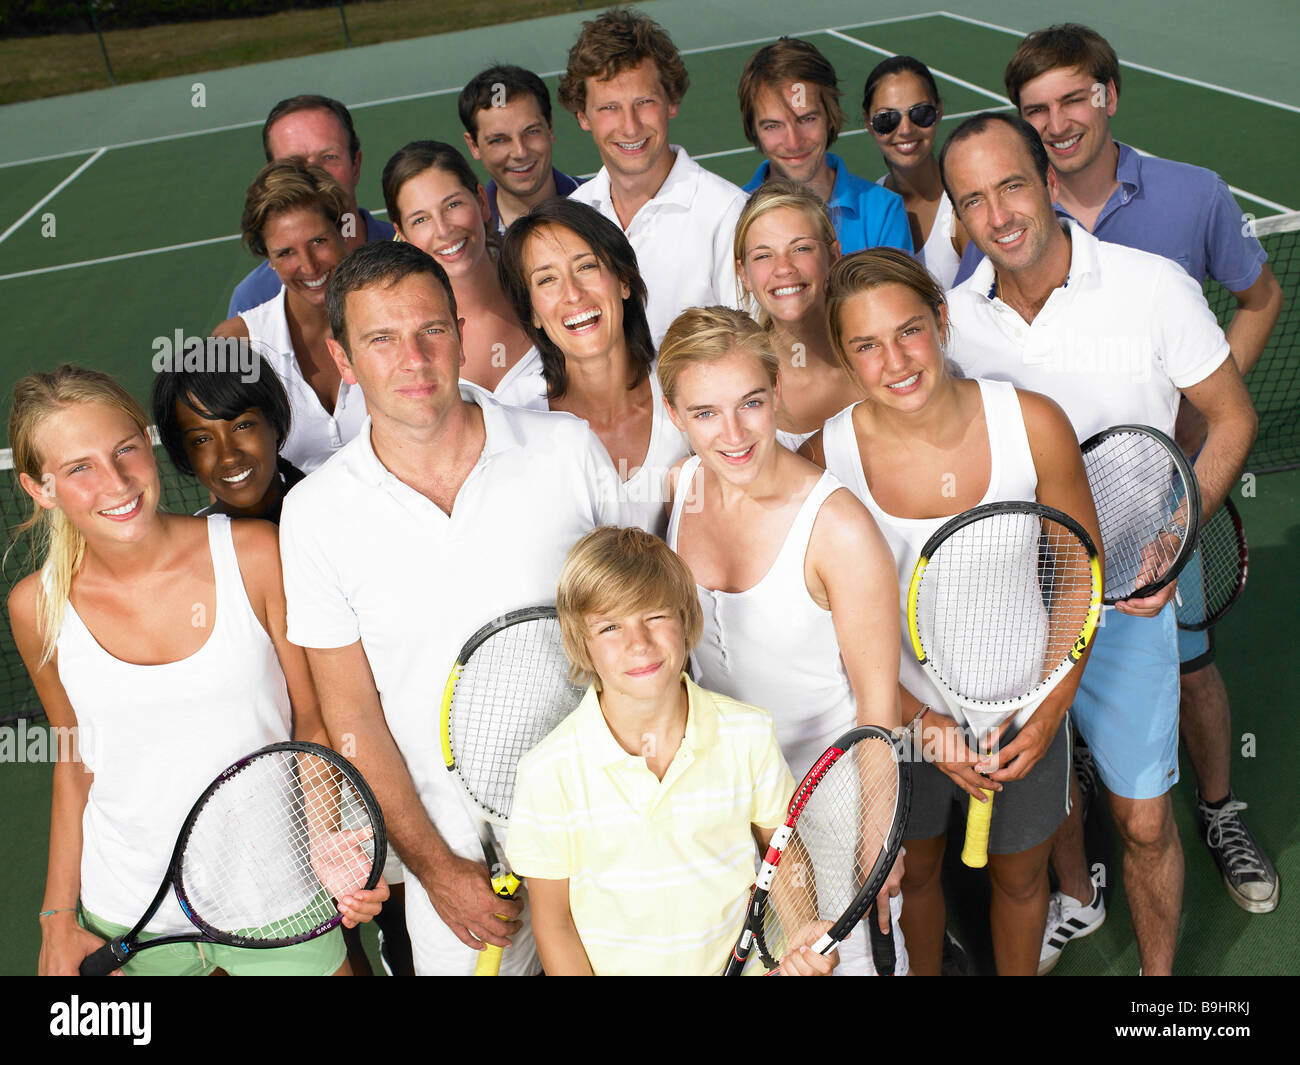 Group of people on tennis court Stock Photo